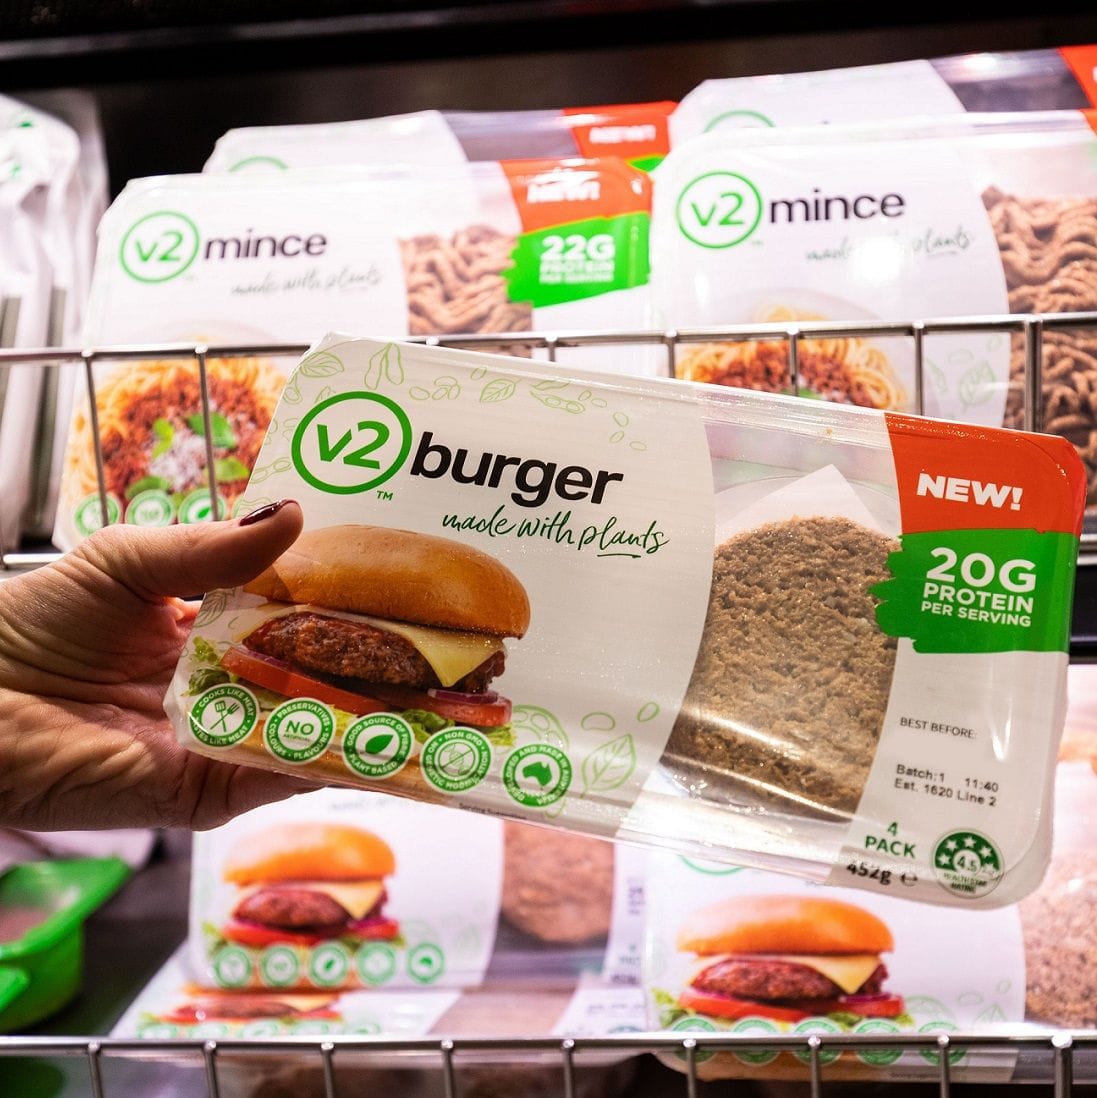 Rebel Whopper creators expand plant-based range to Woolworths